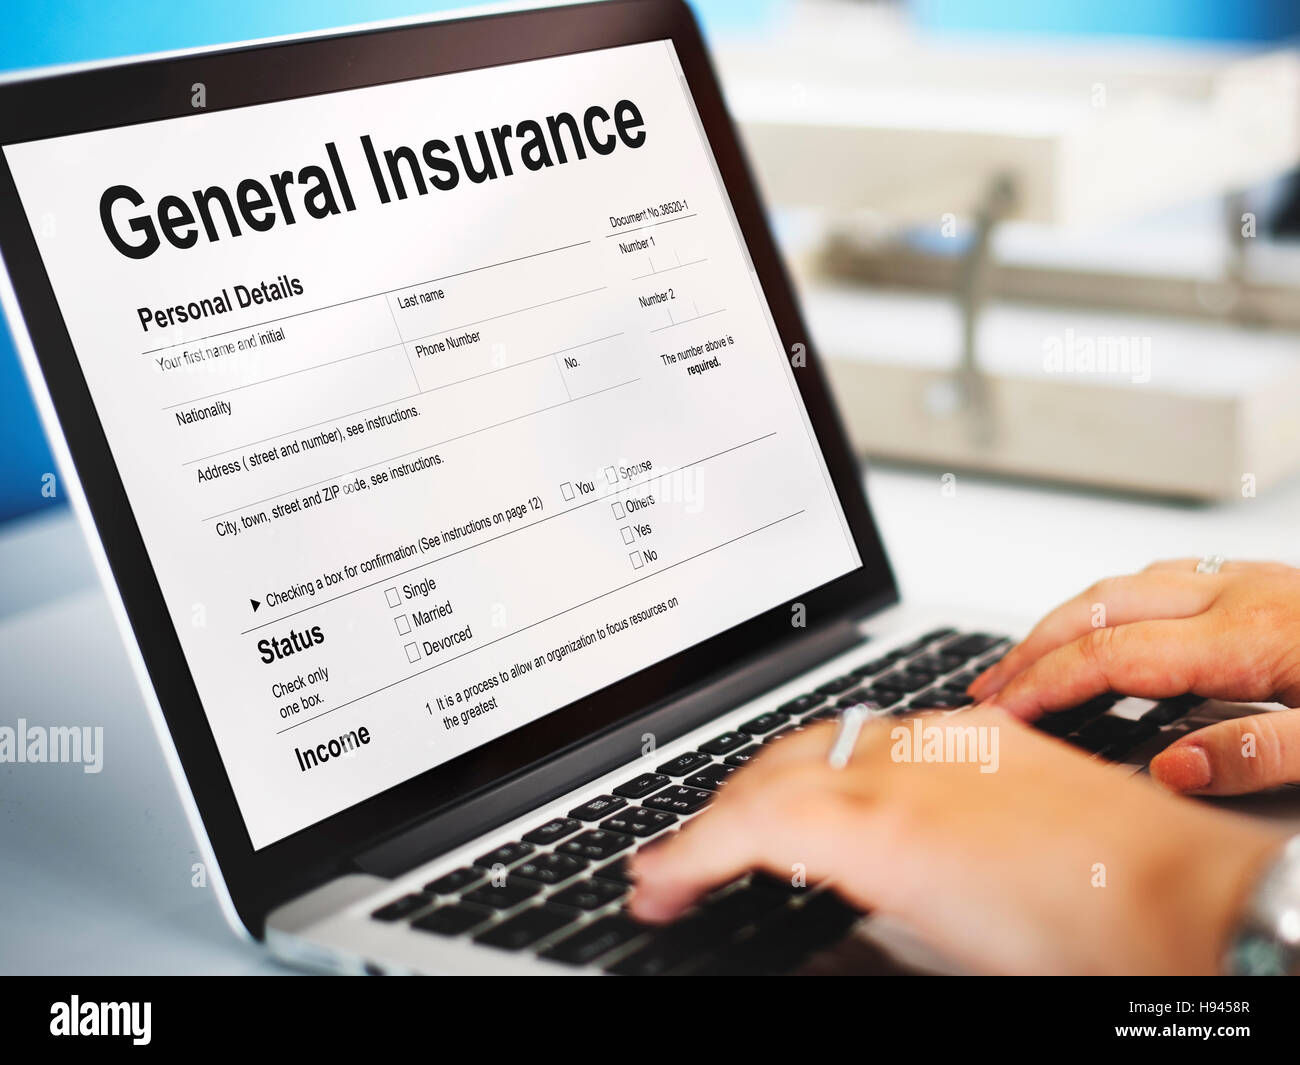 general-insurance-rebate-form-information-concept-stock-photo-alamy